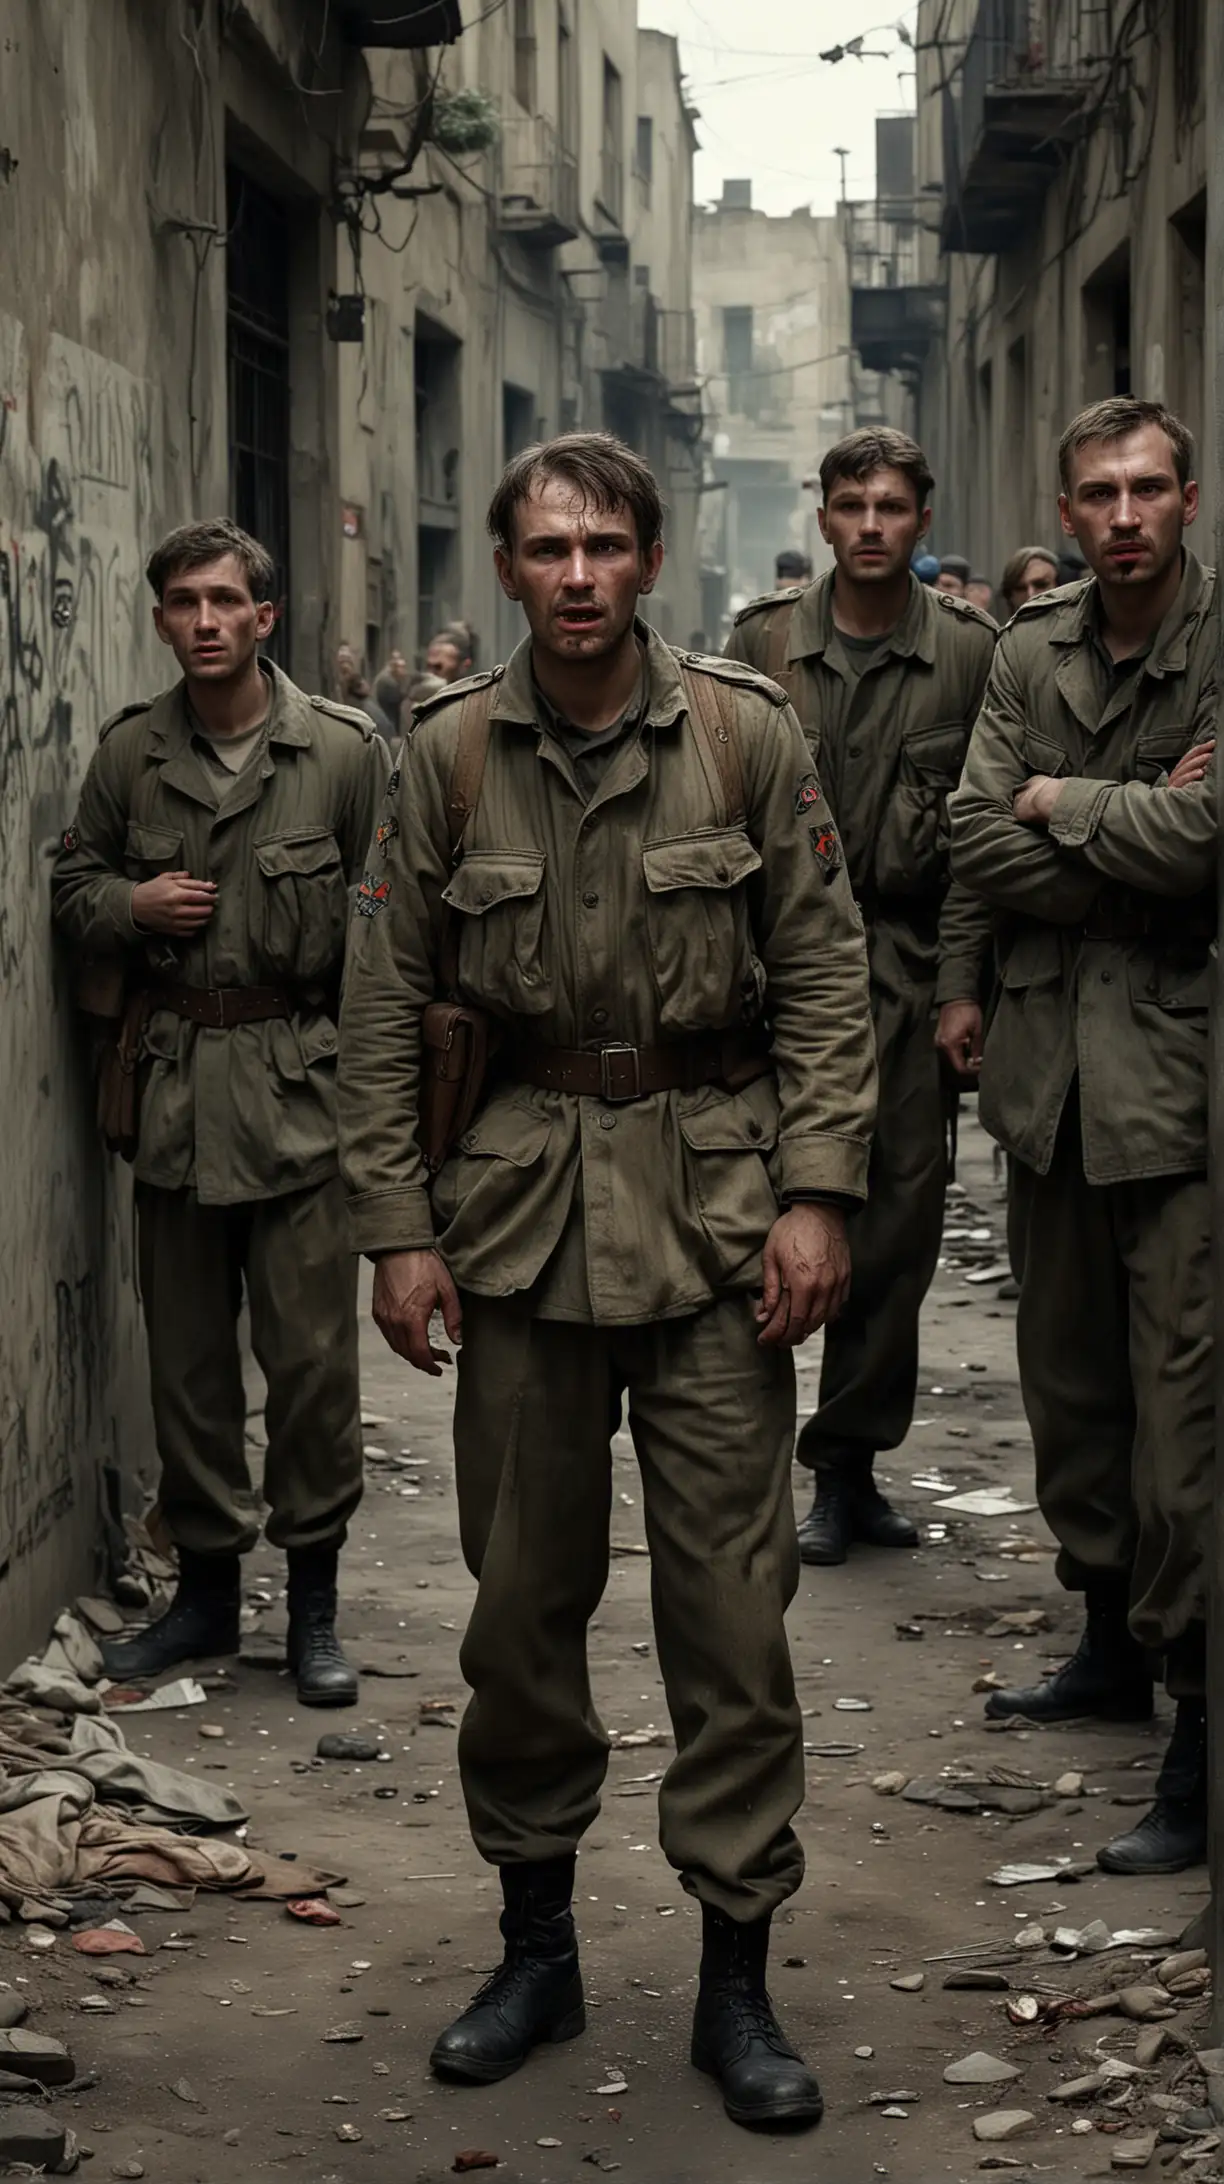 The image should capture the oppressive atmosphere of the time, with dark, shadowy alleys and crumbling buildings in the background. The soldier or policeman should be dressed in a drab uniform, with a stern expression on their face and a firm grip on the arms of the detained men.
The men being detained should appear frightened and submissive, with their hands raised in surrender and expressions of fear on their faces. Their clothing should be worn and tattered, reflecting the hardships faced by ordinary citizens under the Soviet regime.
Additional details such as flickering streetlights, graffiti-covered walls, and distant sounds of shouting or gunfire can help enhance the sense of tension and danger in the scene. Hyper realistic.